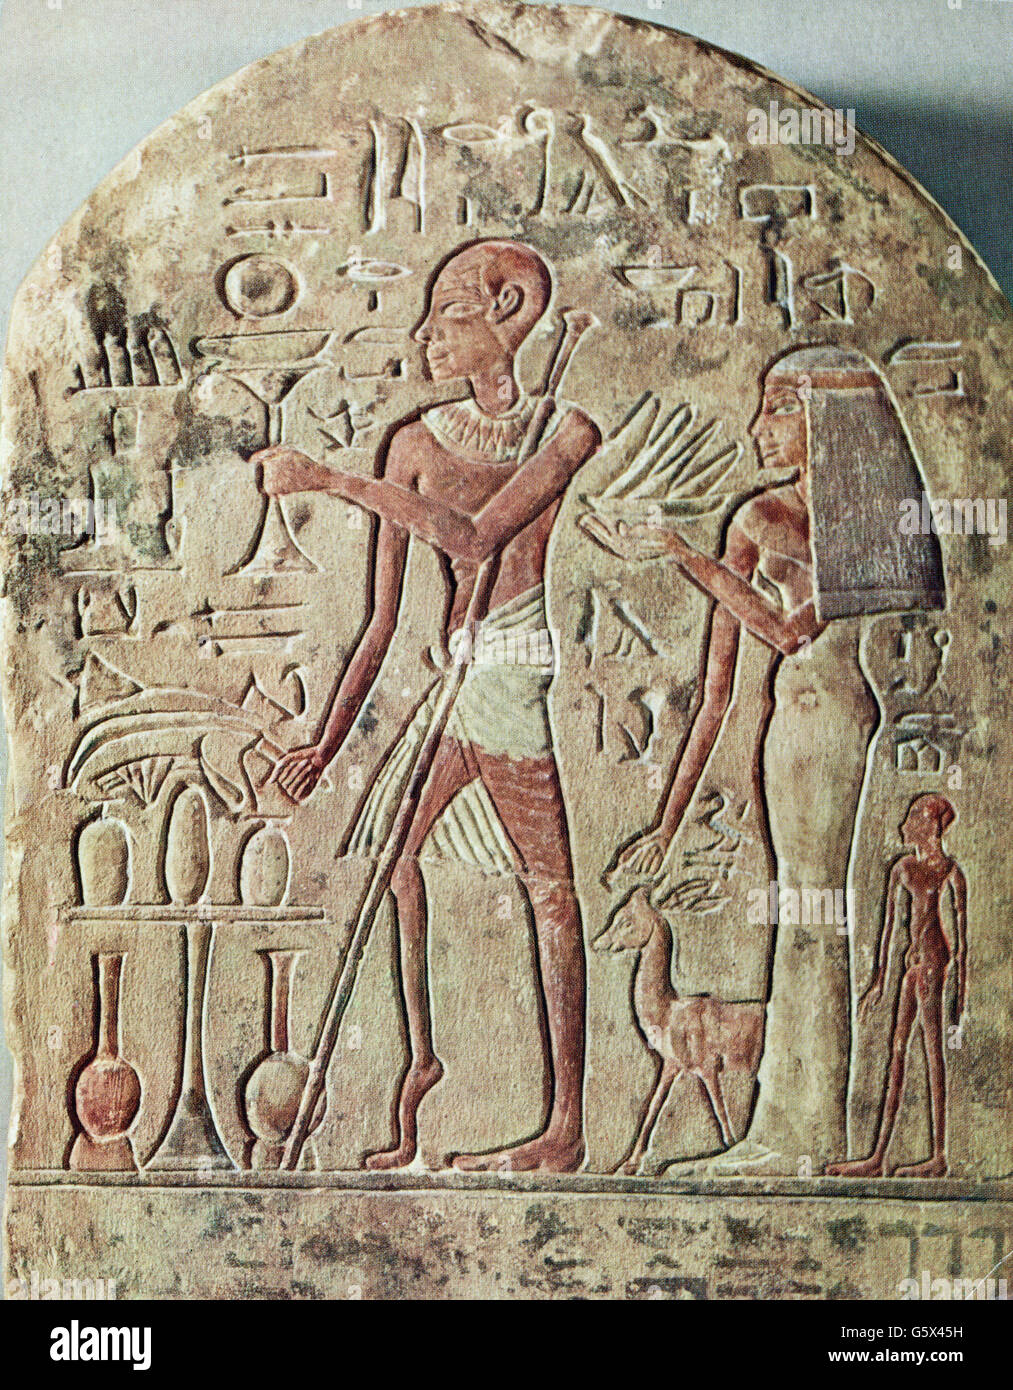 medicine,diseases,poliomyelitis,man with poliomyelitis,relief,painted,Egypt,Ny Carlsberg Glyptothek,Copenhagen,ancient world,ancient times,Egyptian,fine arts,art,sculpturing,script,scripts,hieroglyph,hieroglyphs,hieroglyphics,full length,standing,holding,hold,vessel,vessels,container,containers,clothes,loincloth,loin cloth,loincloths,loin cloths,crutch,crutches,sickness,sicknesses,sick person,sick people,sick,paralysed,physical handicap,physical disability,handicaps,handicapped person,disabled person,handicapped peo,Additional-Rights-Clearences-Not Available Stock Photo